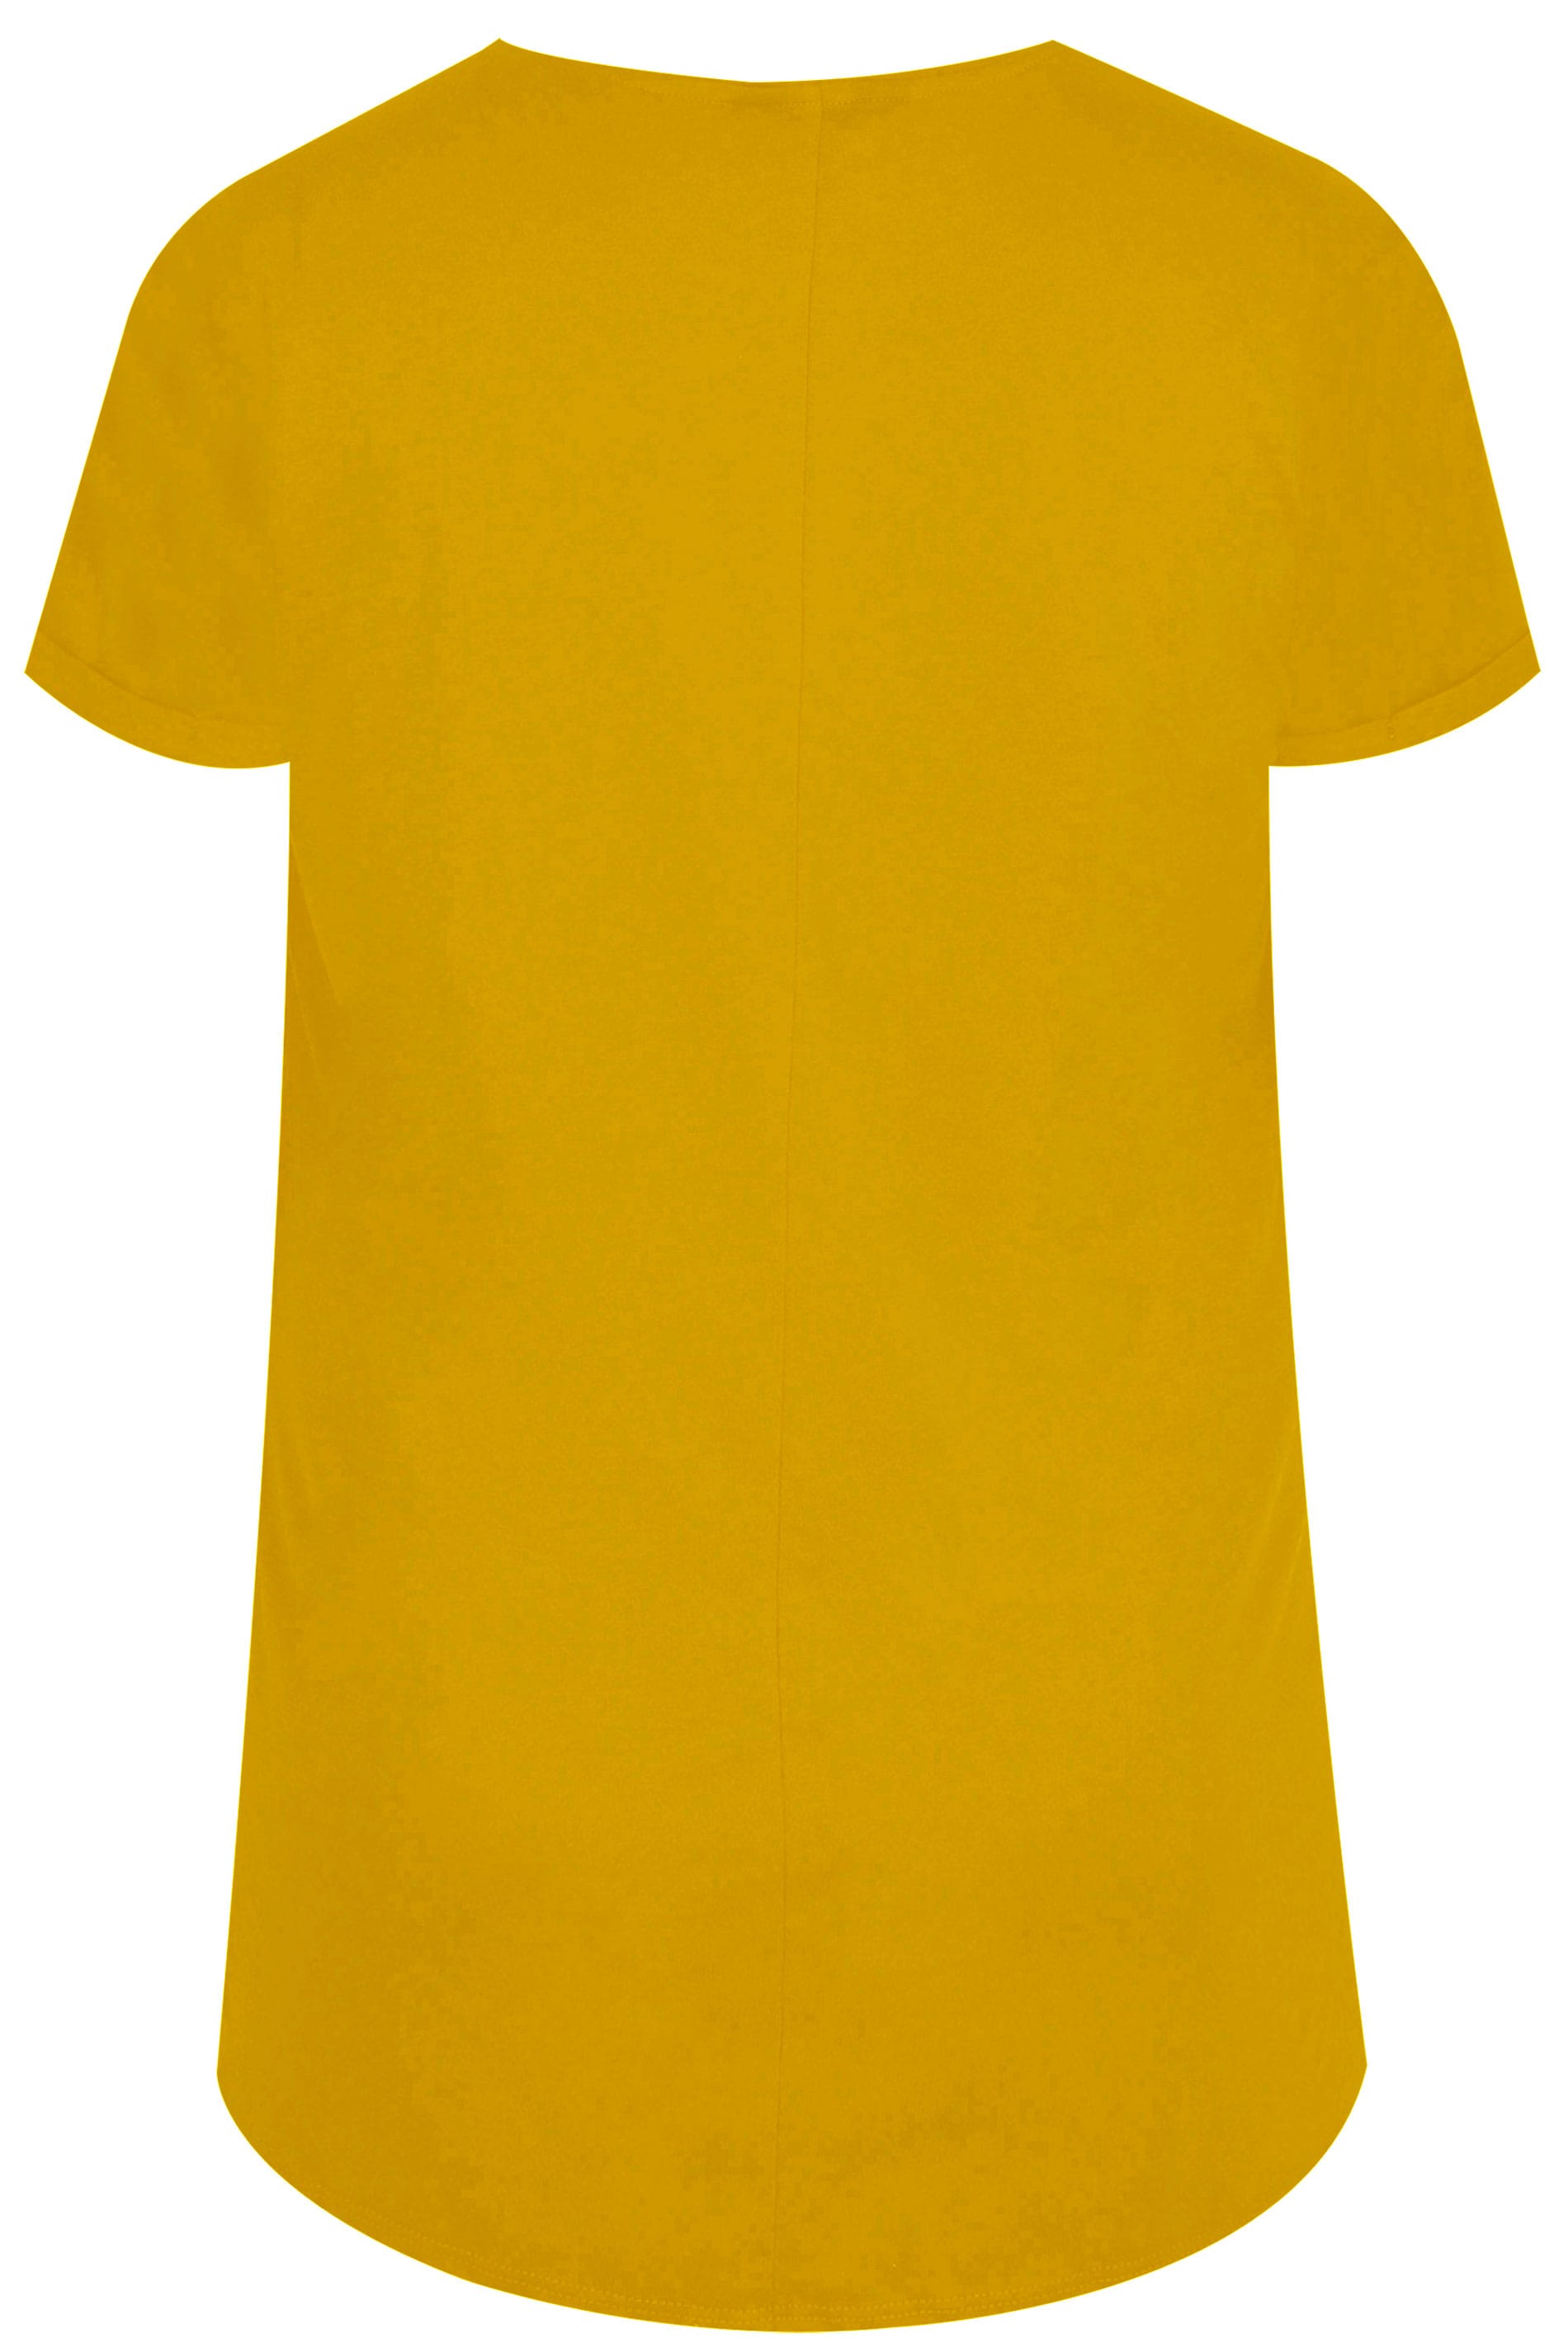 Download Mustard Yellow Mock Pocket T-Shirt With Curved Hem, plus ...